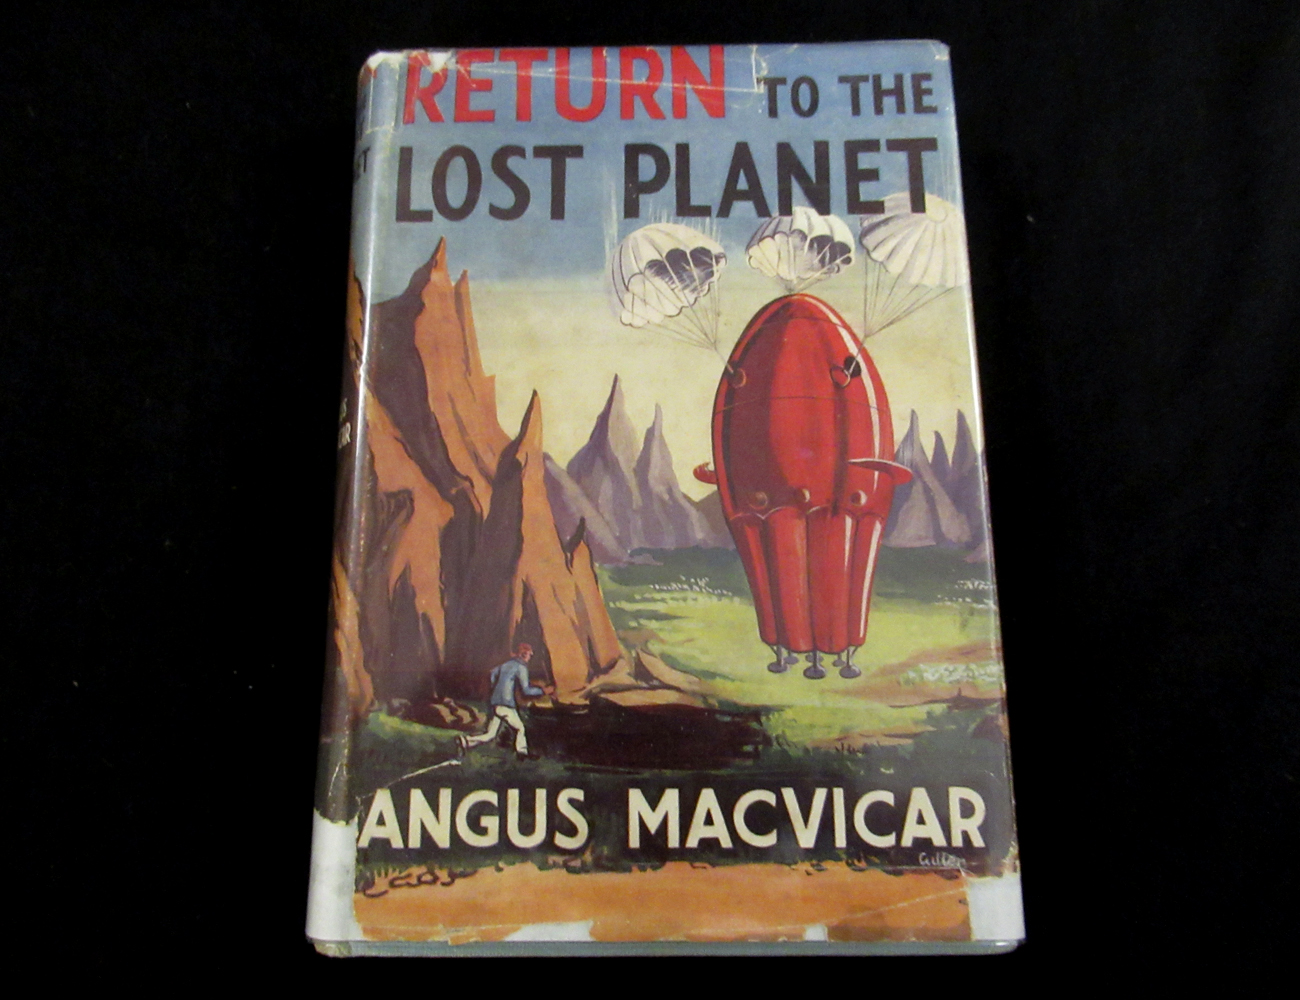 ANGUS MACVICAR: RETURN TO THE LOST PLANET, London, Burke, 1954, 1st edition, original cloth, dust-